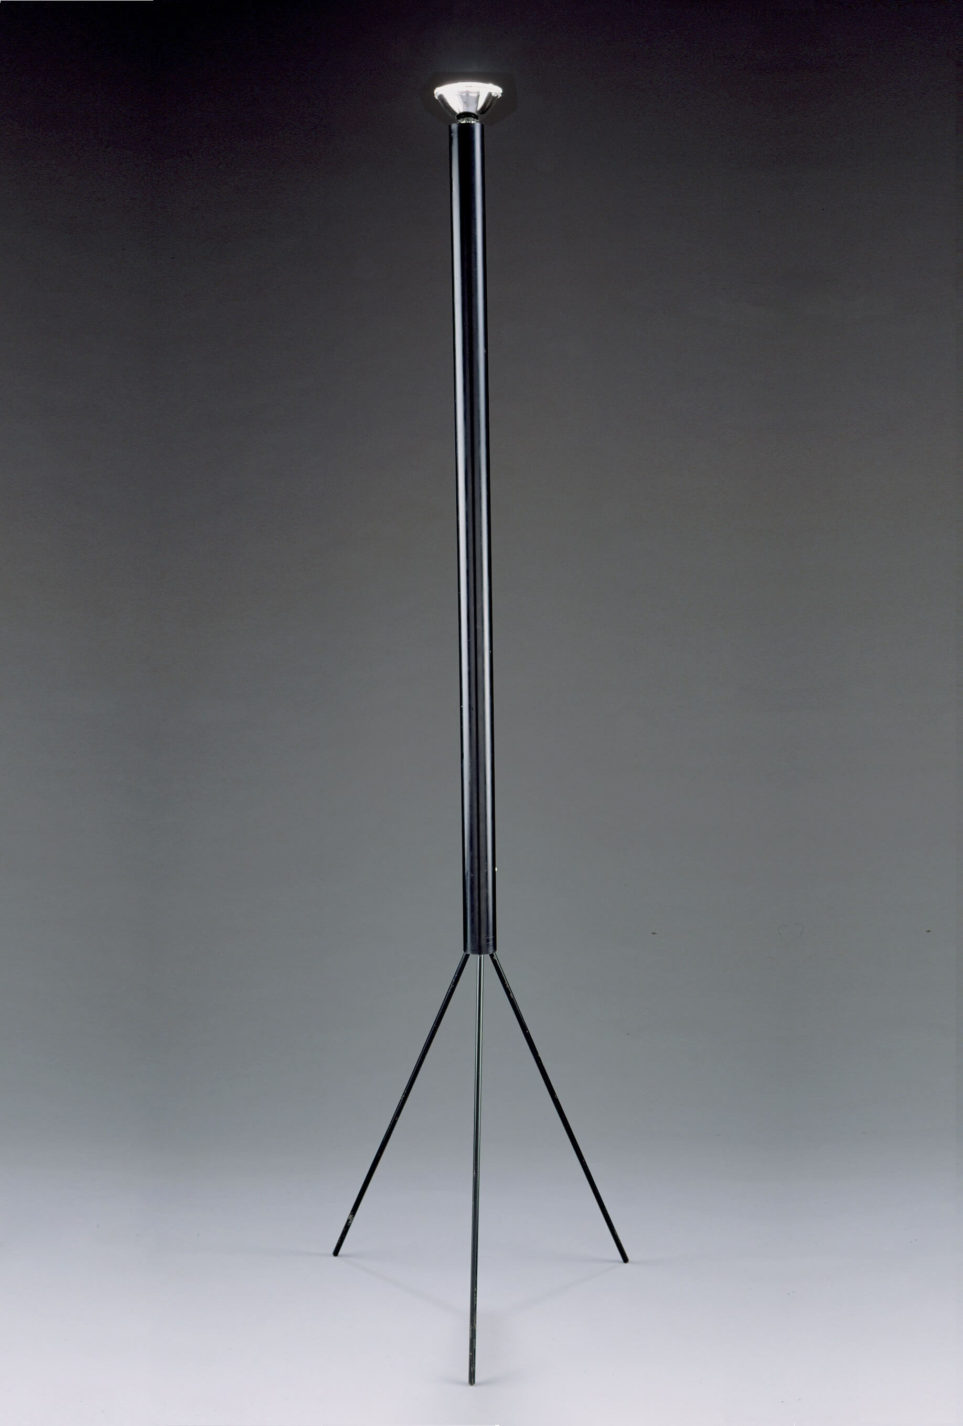 Black floor lamp with a tripod base and long cylindrical stem with a bare halogen bulb at the top.